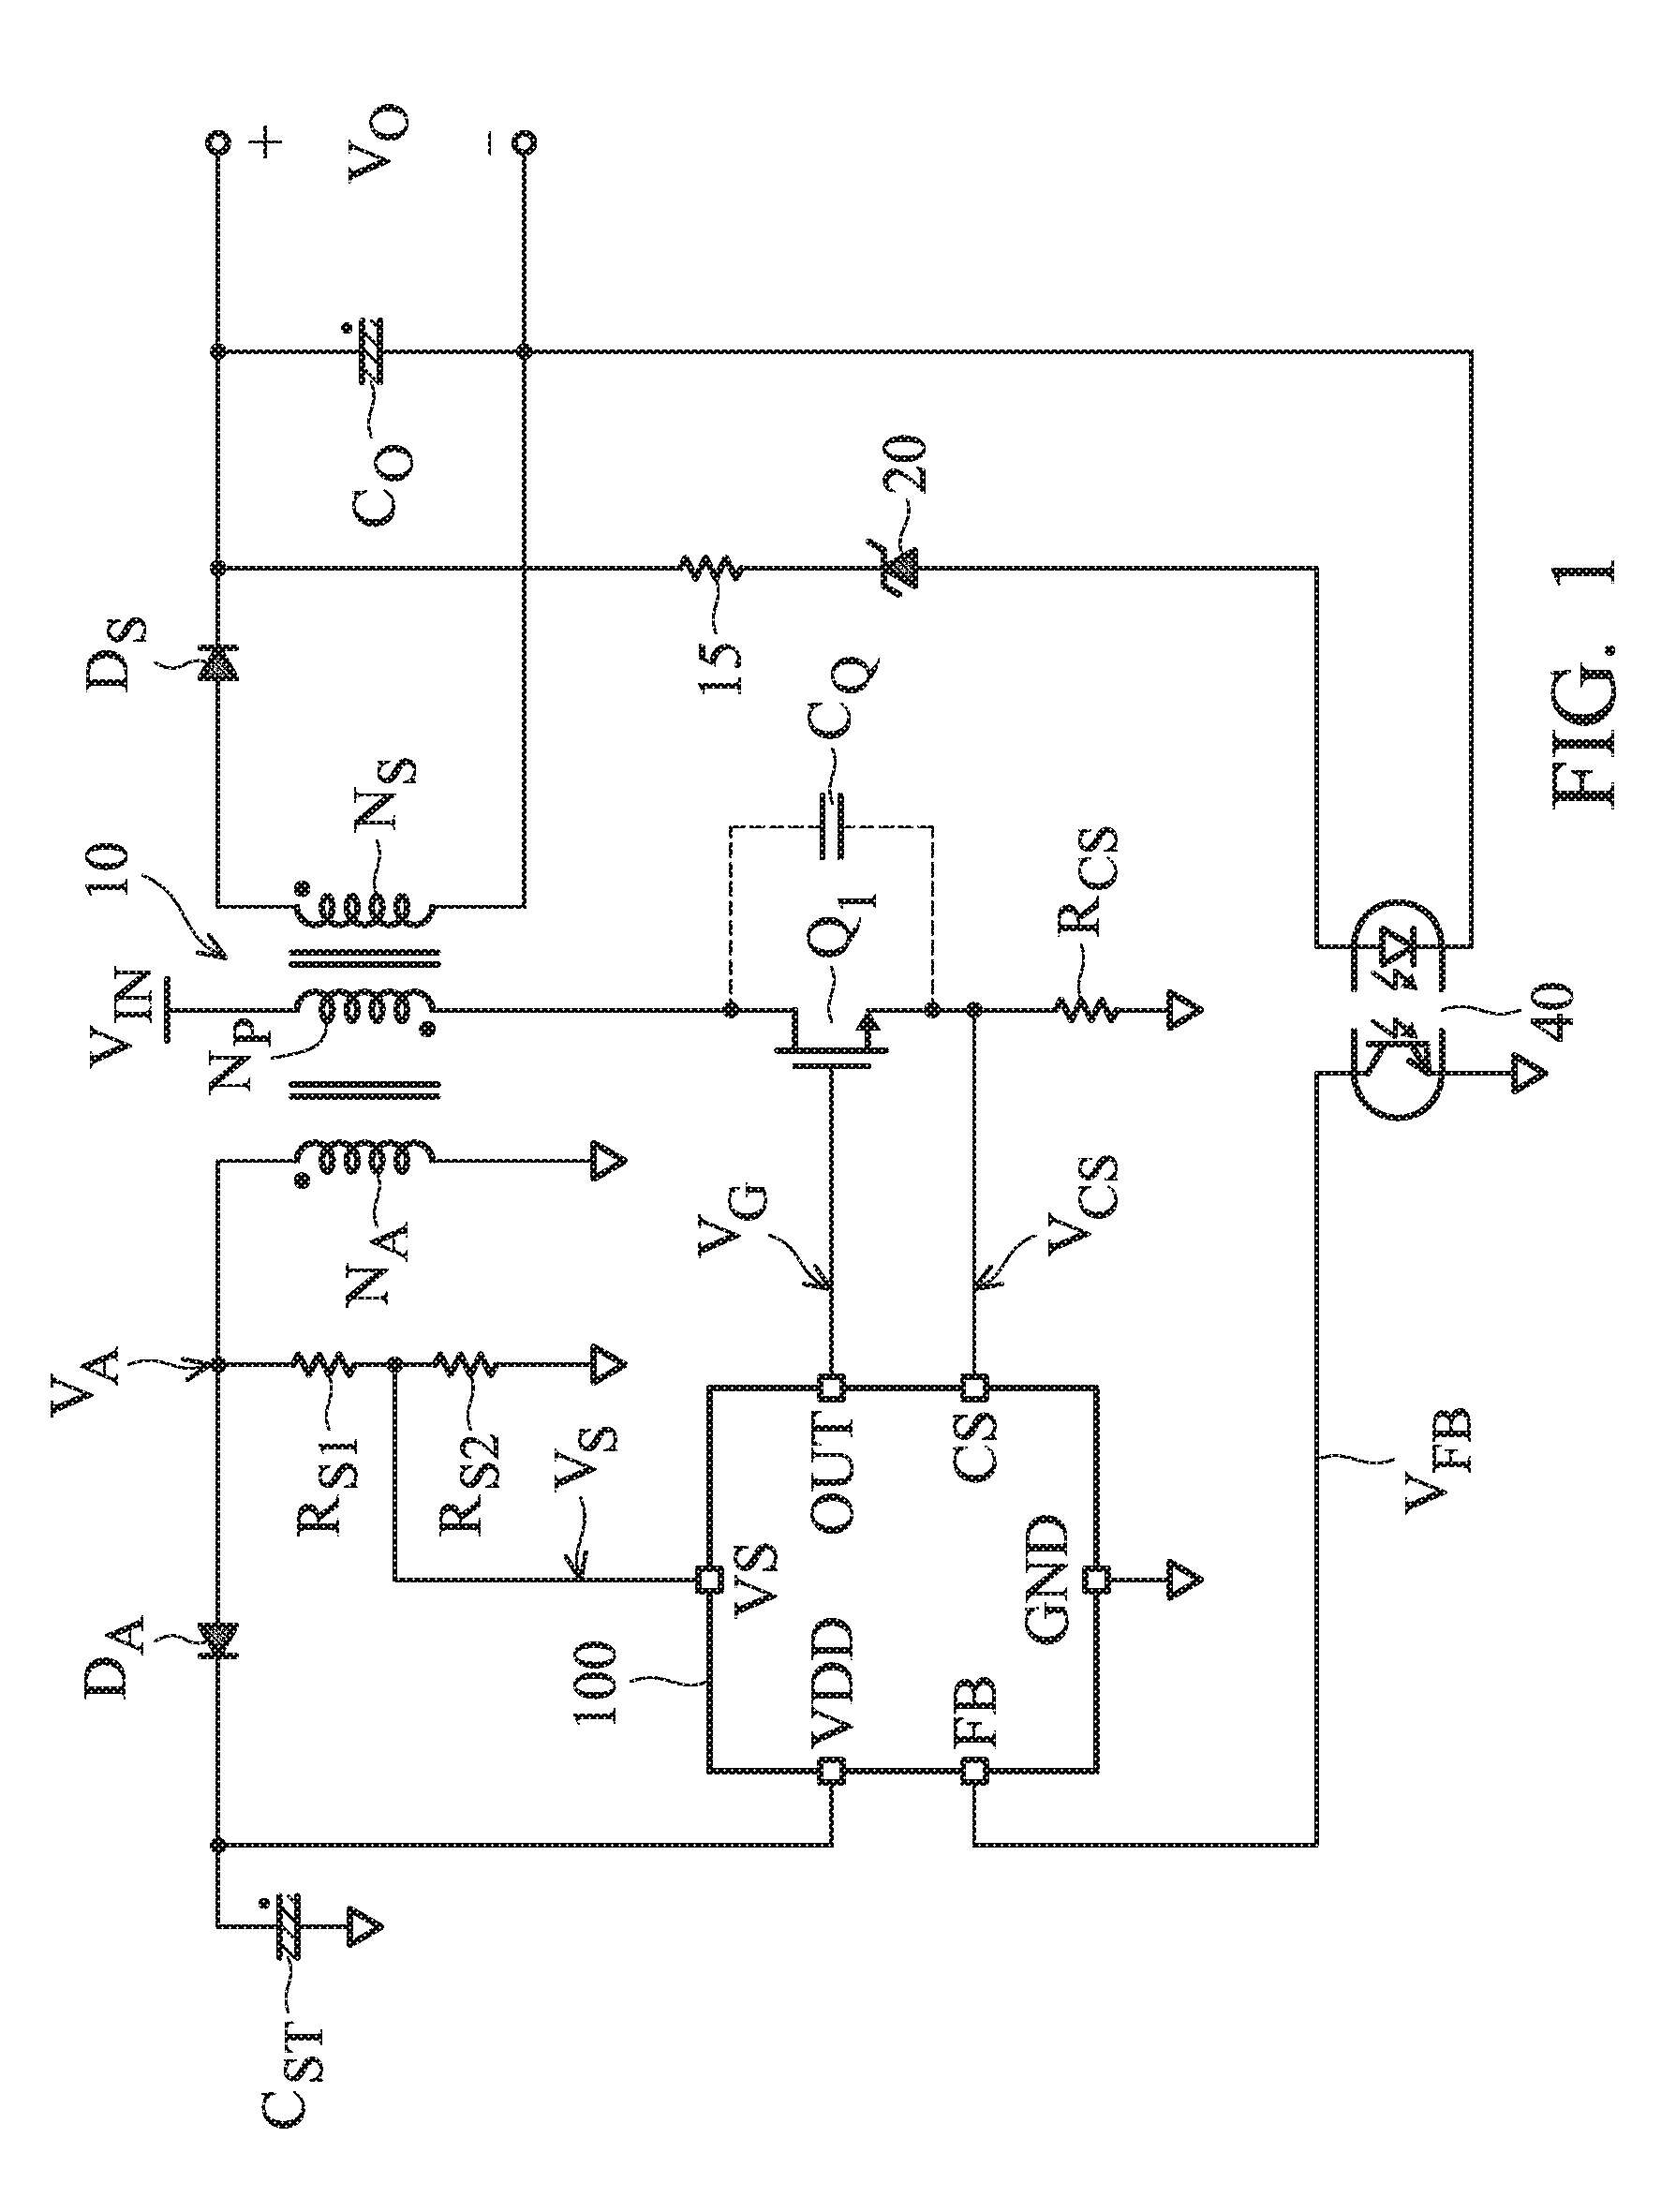 Alternating valley switching for power converter